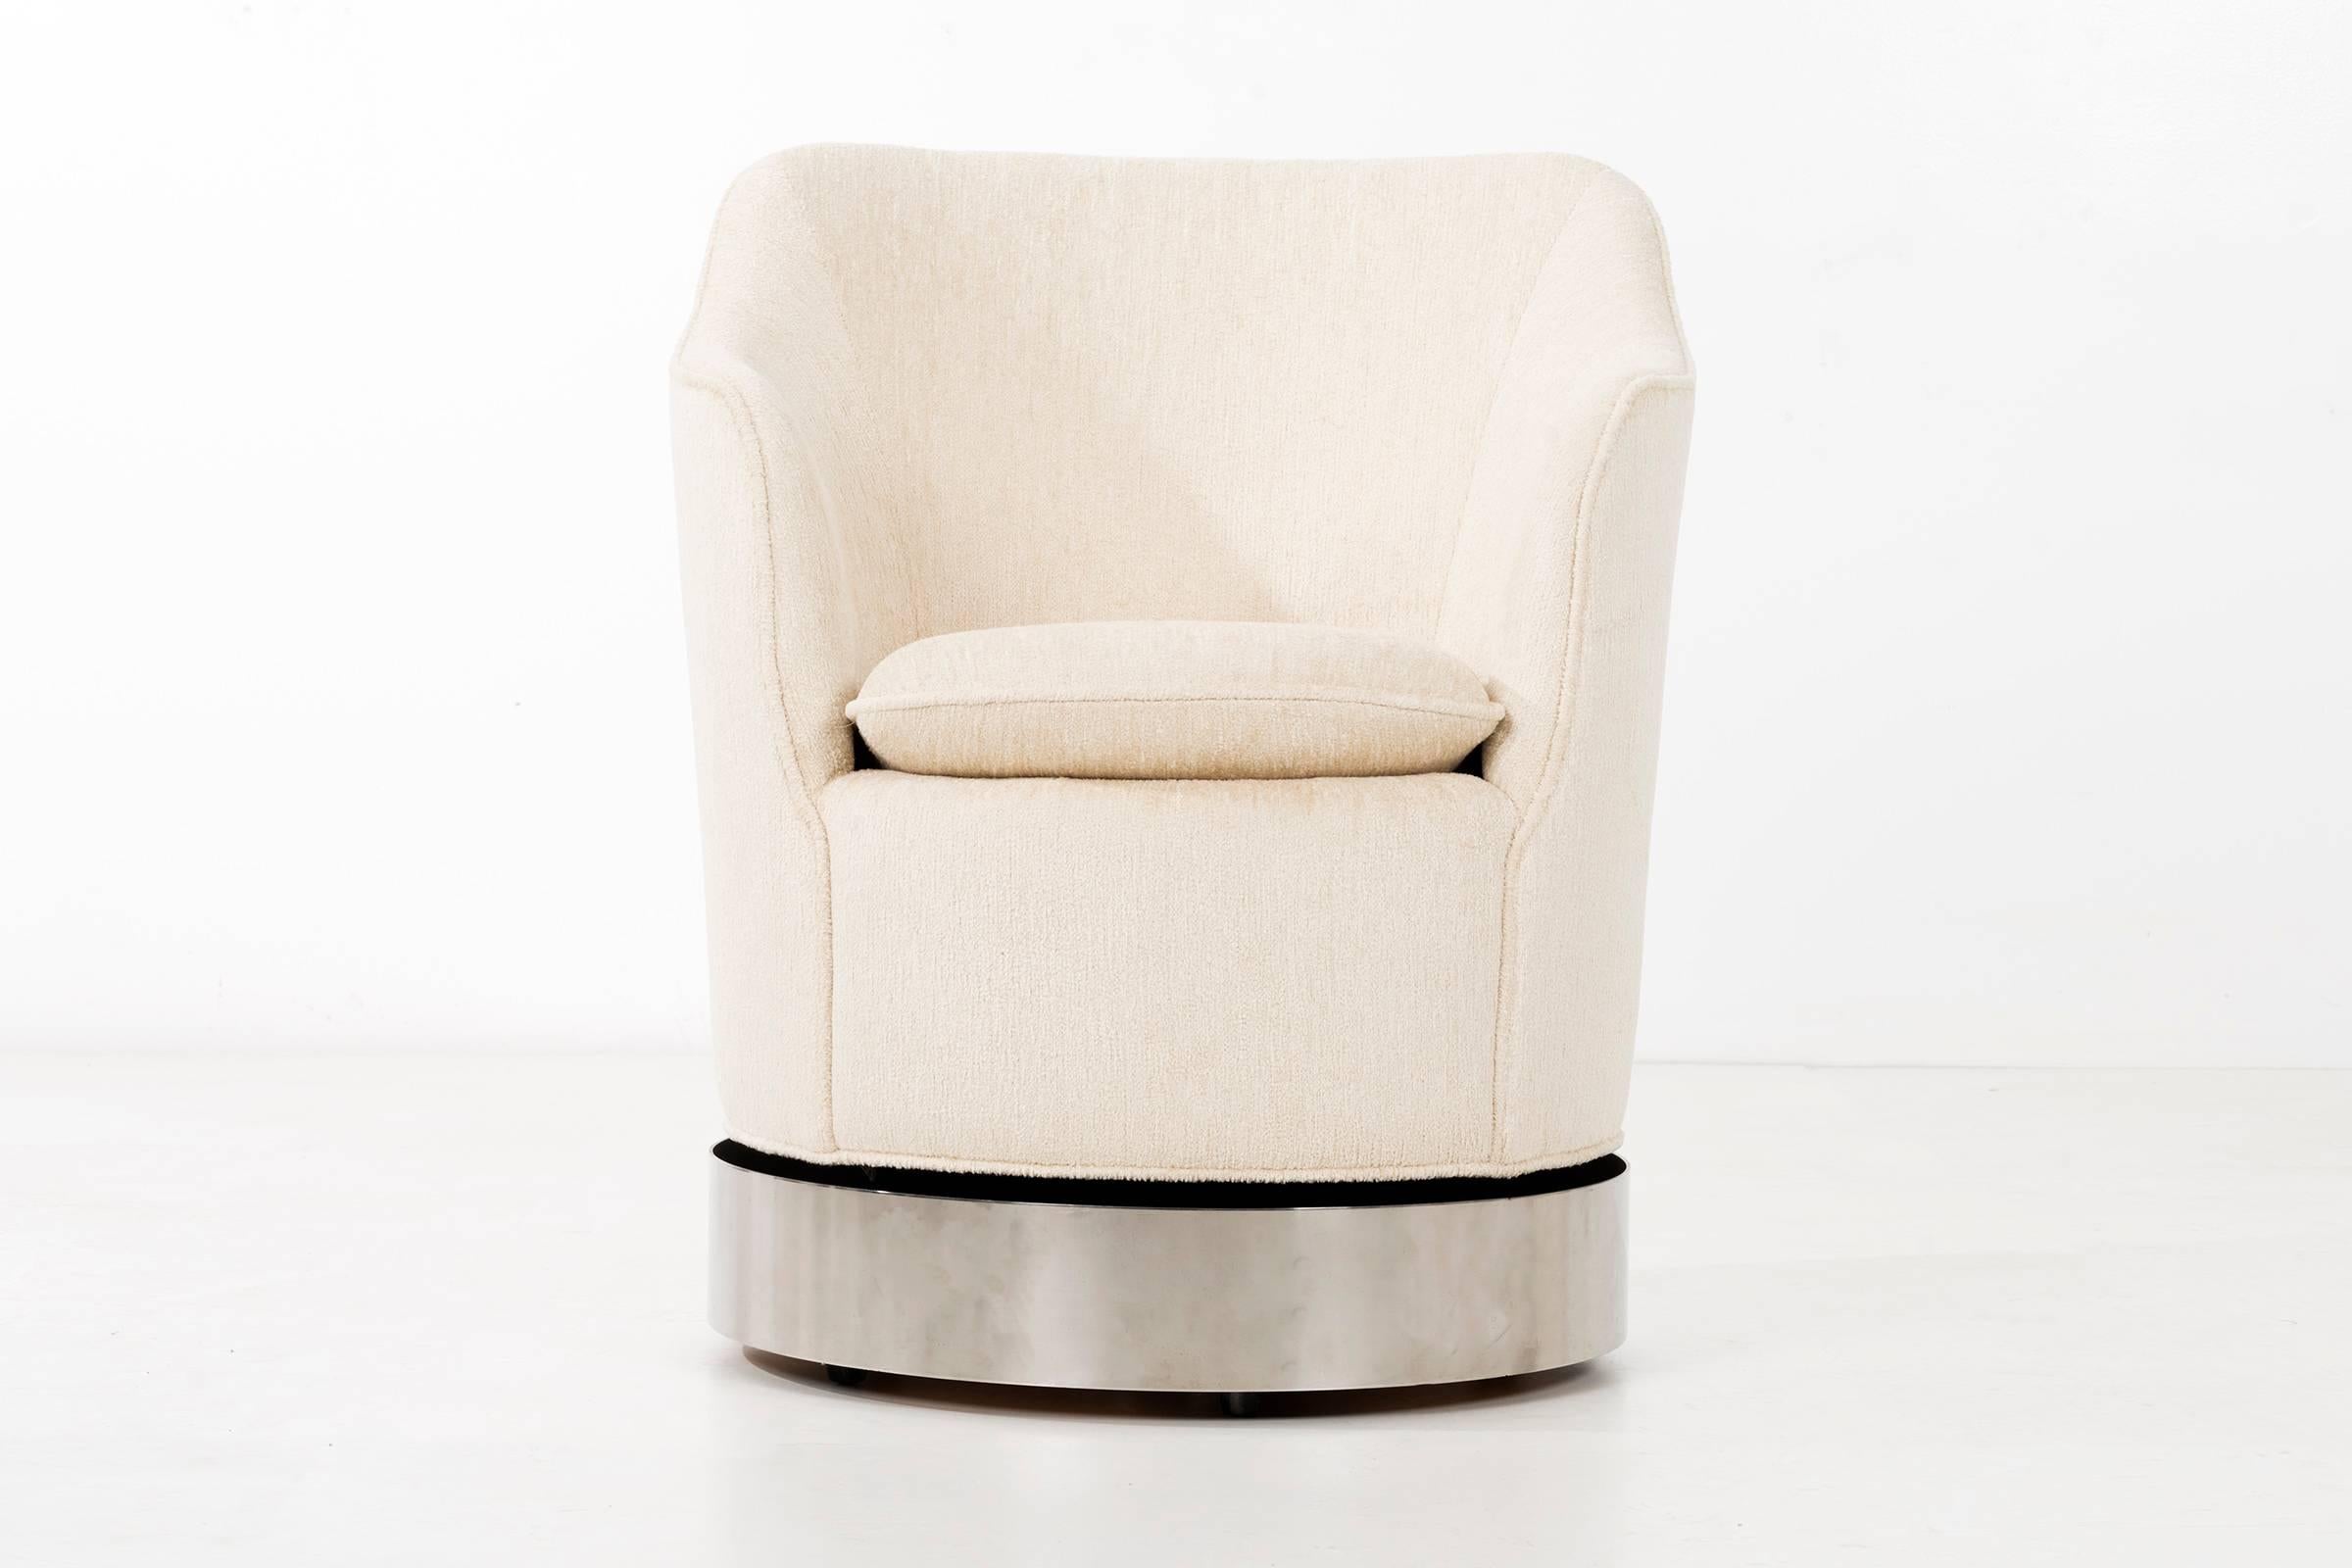 Steel Rotating White Swivel Chairs Philip Enfield